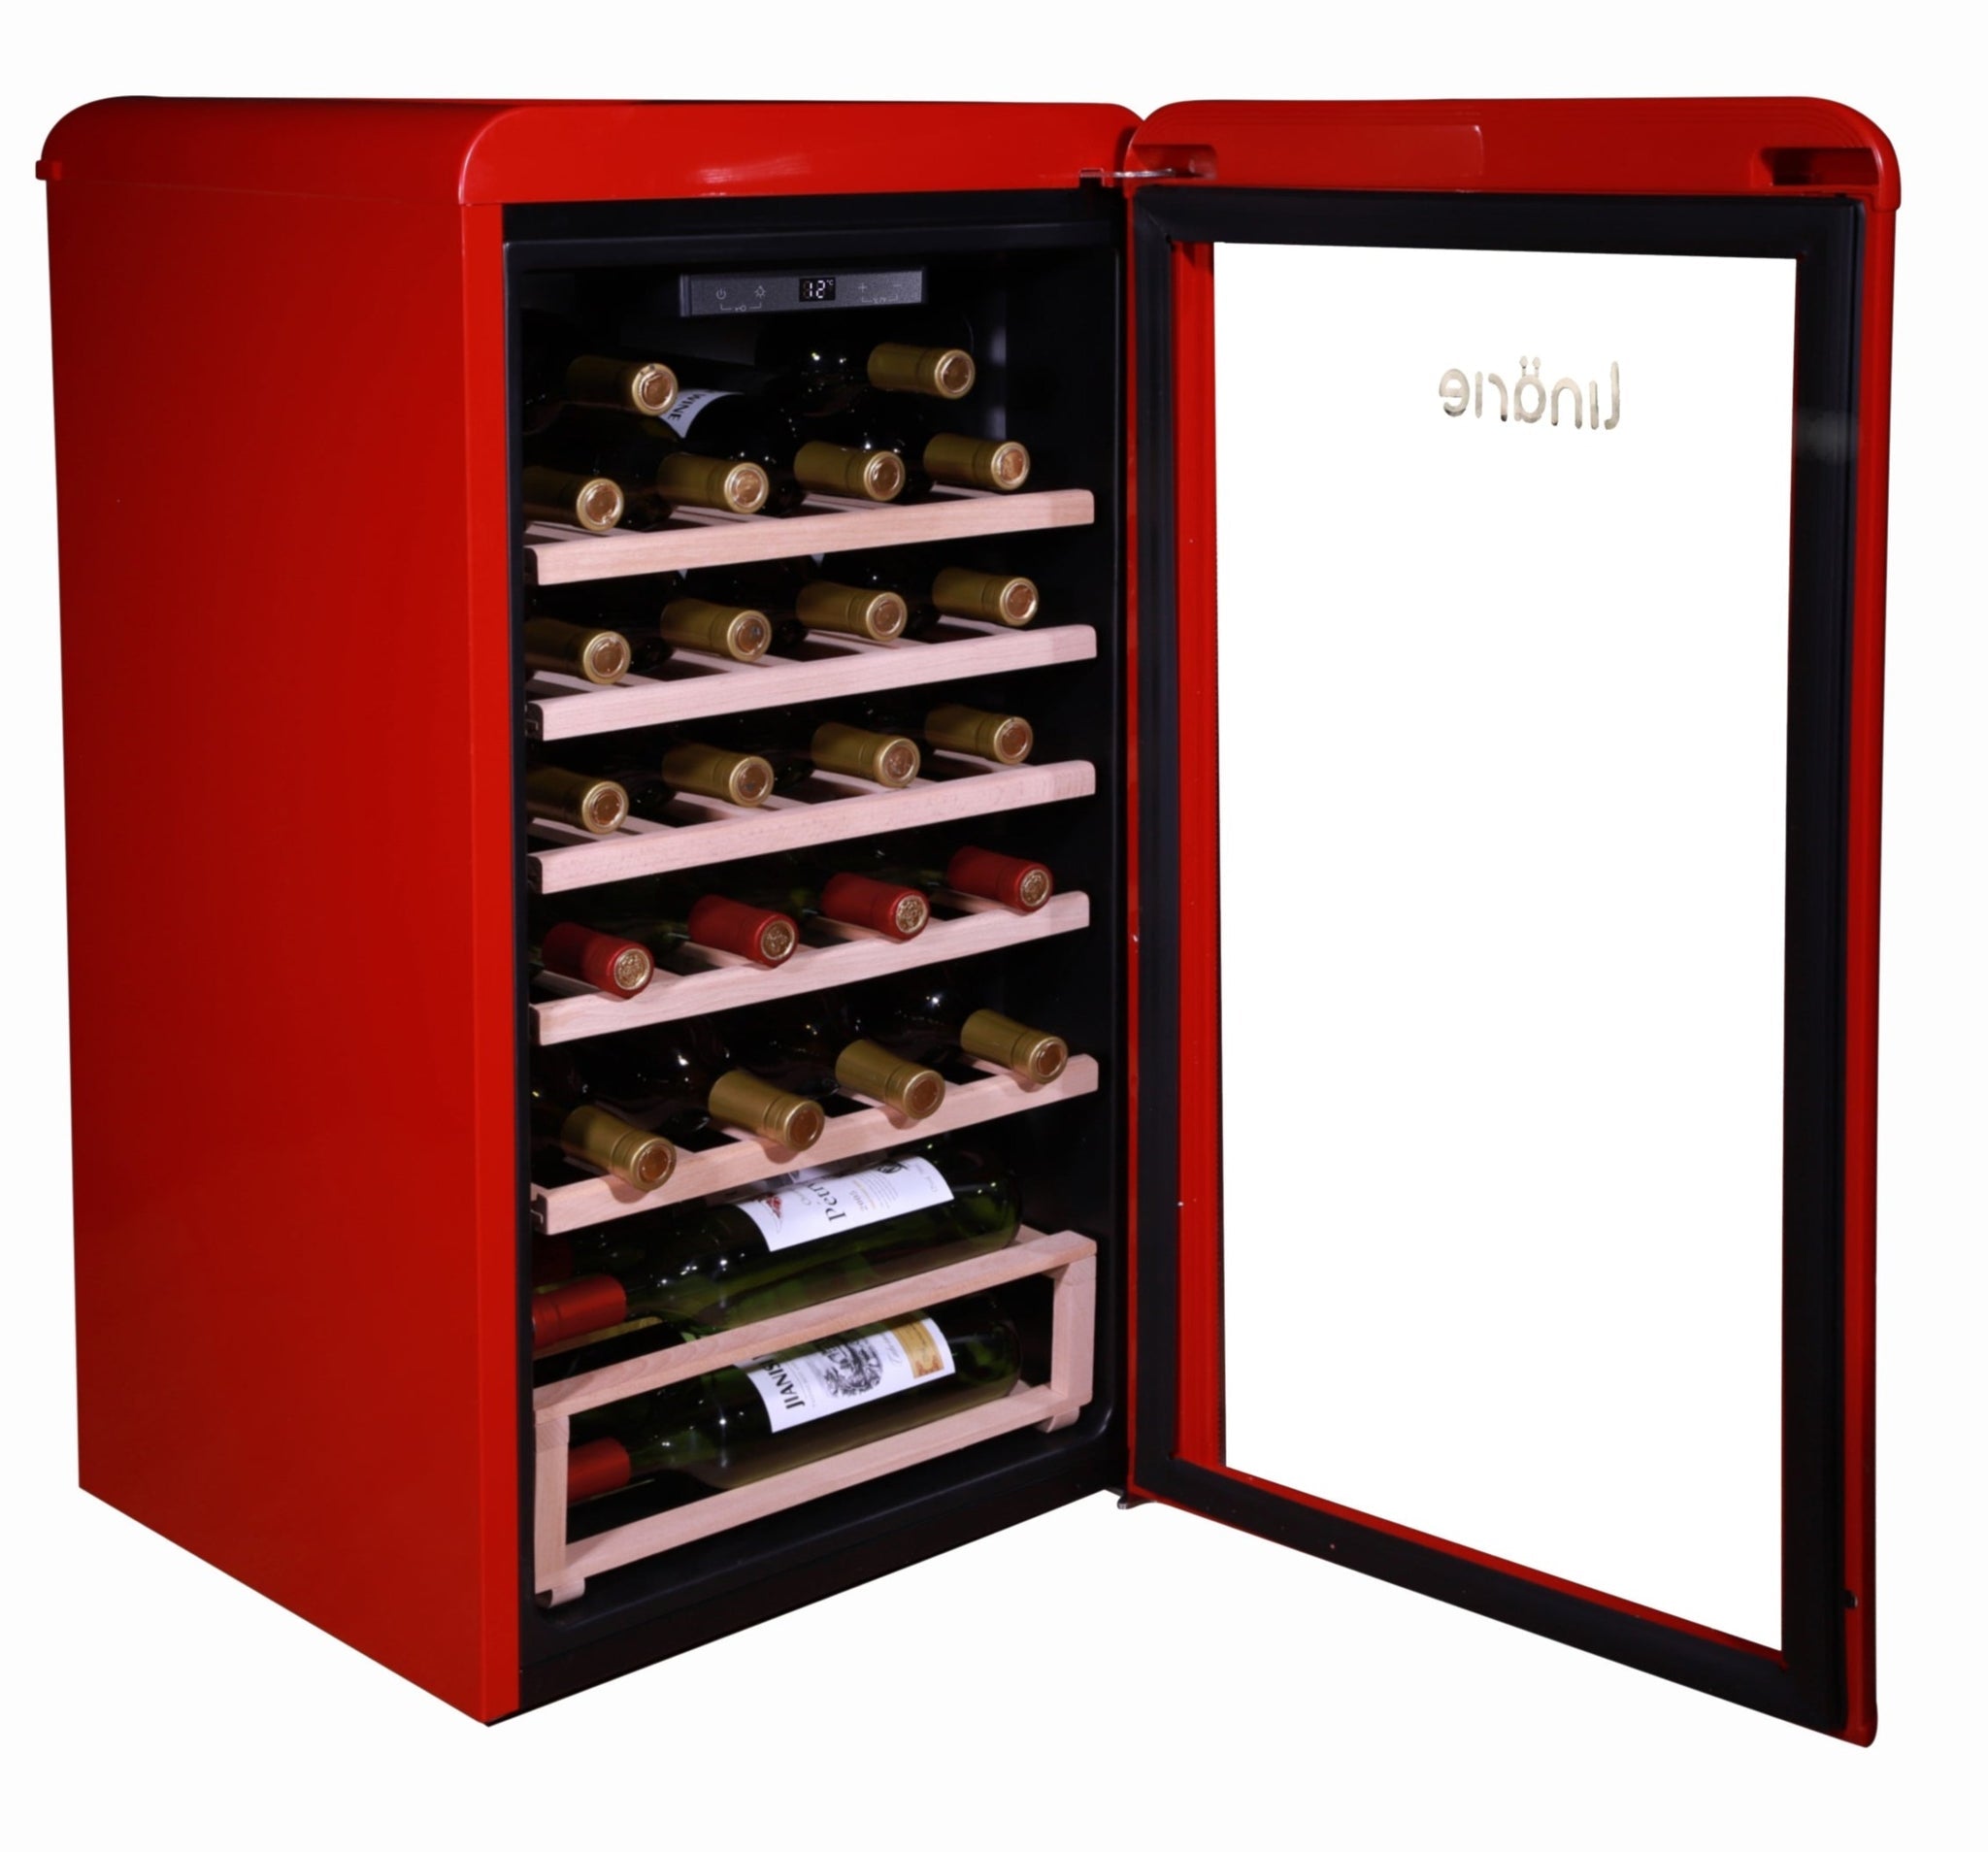 Red retro wine fridge with wooden shelving